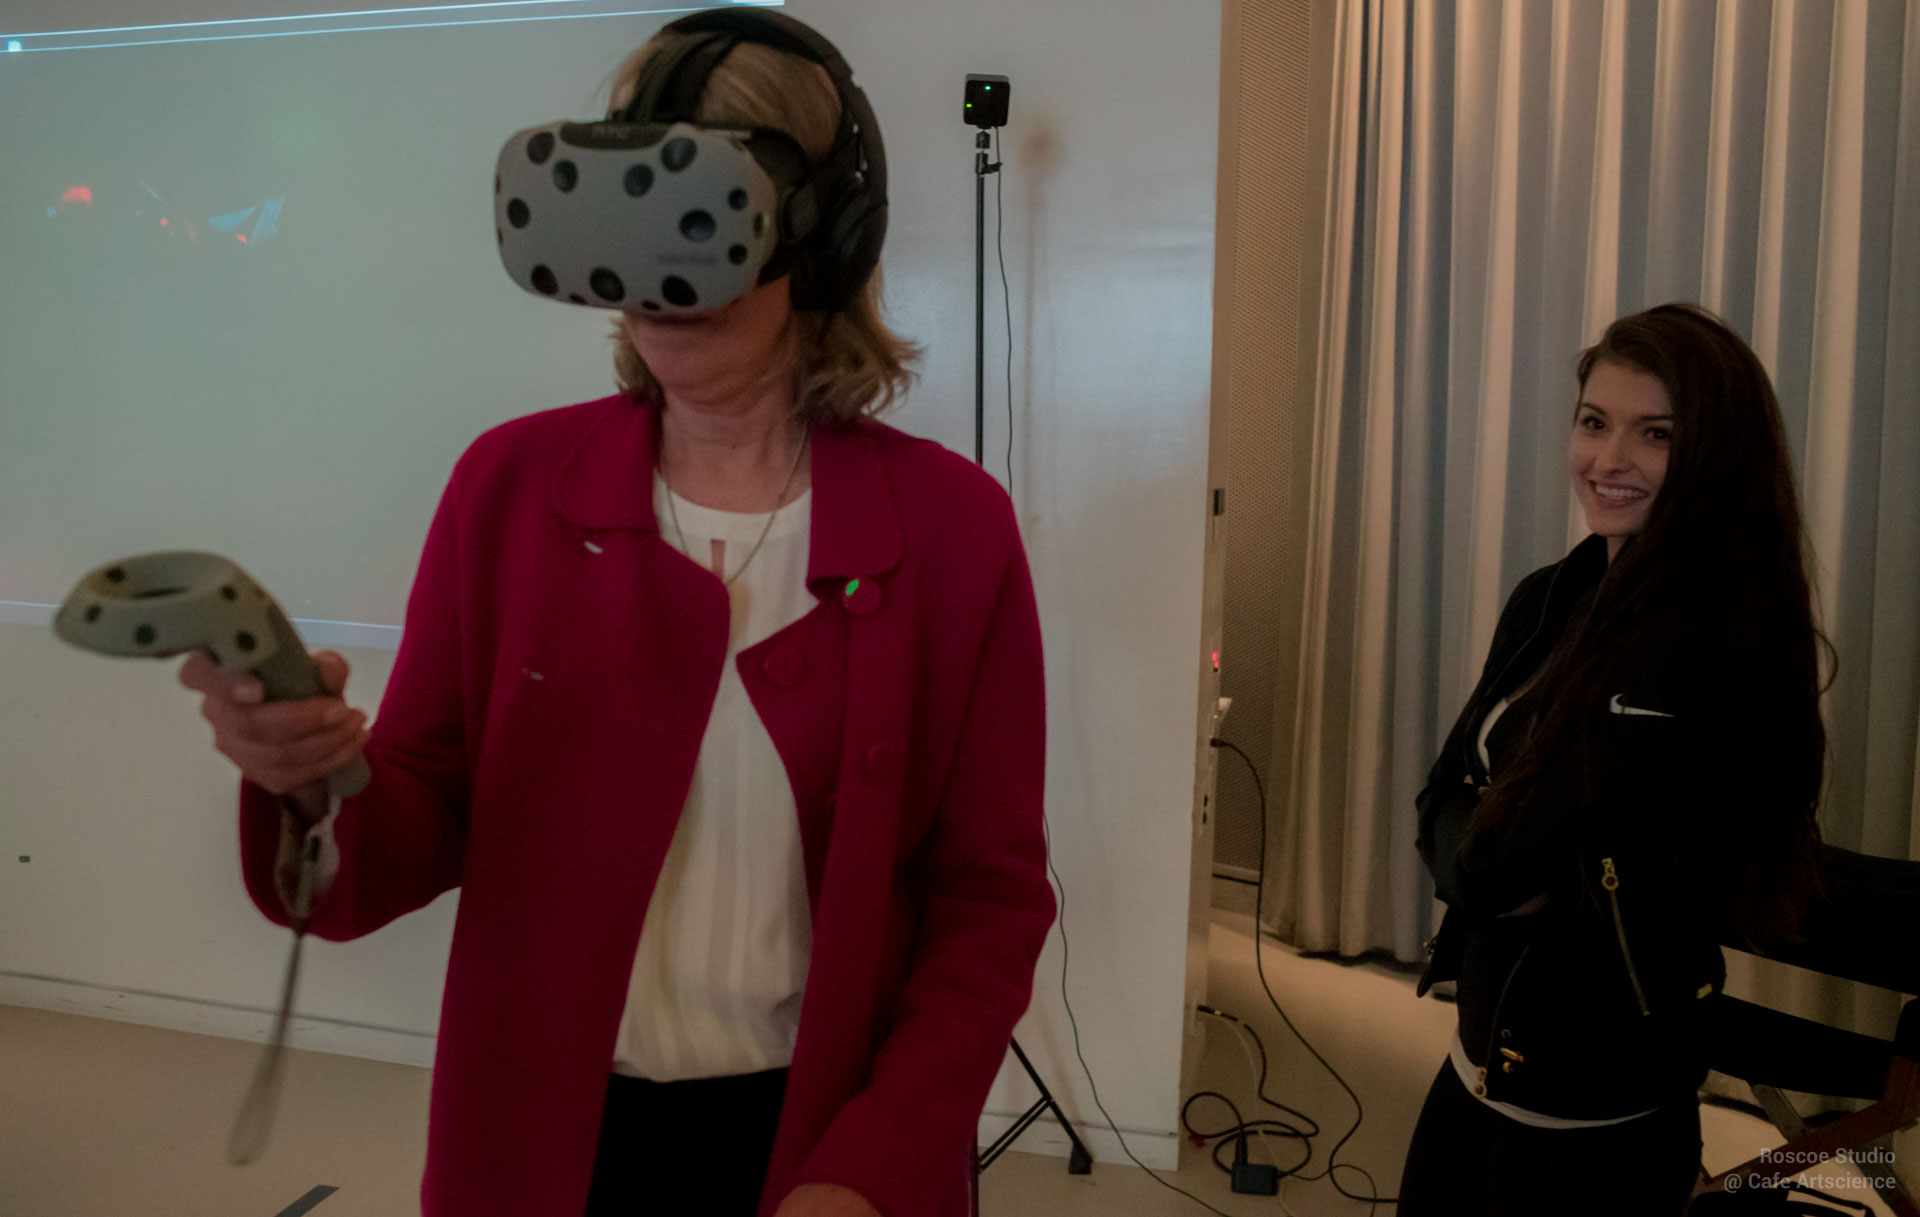 Vr party events medical cambridge